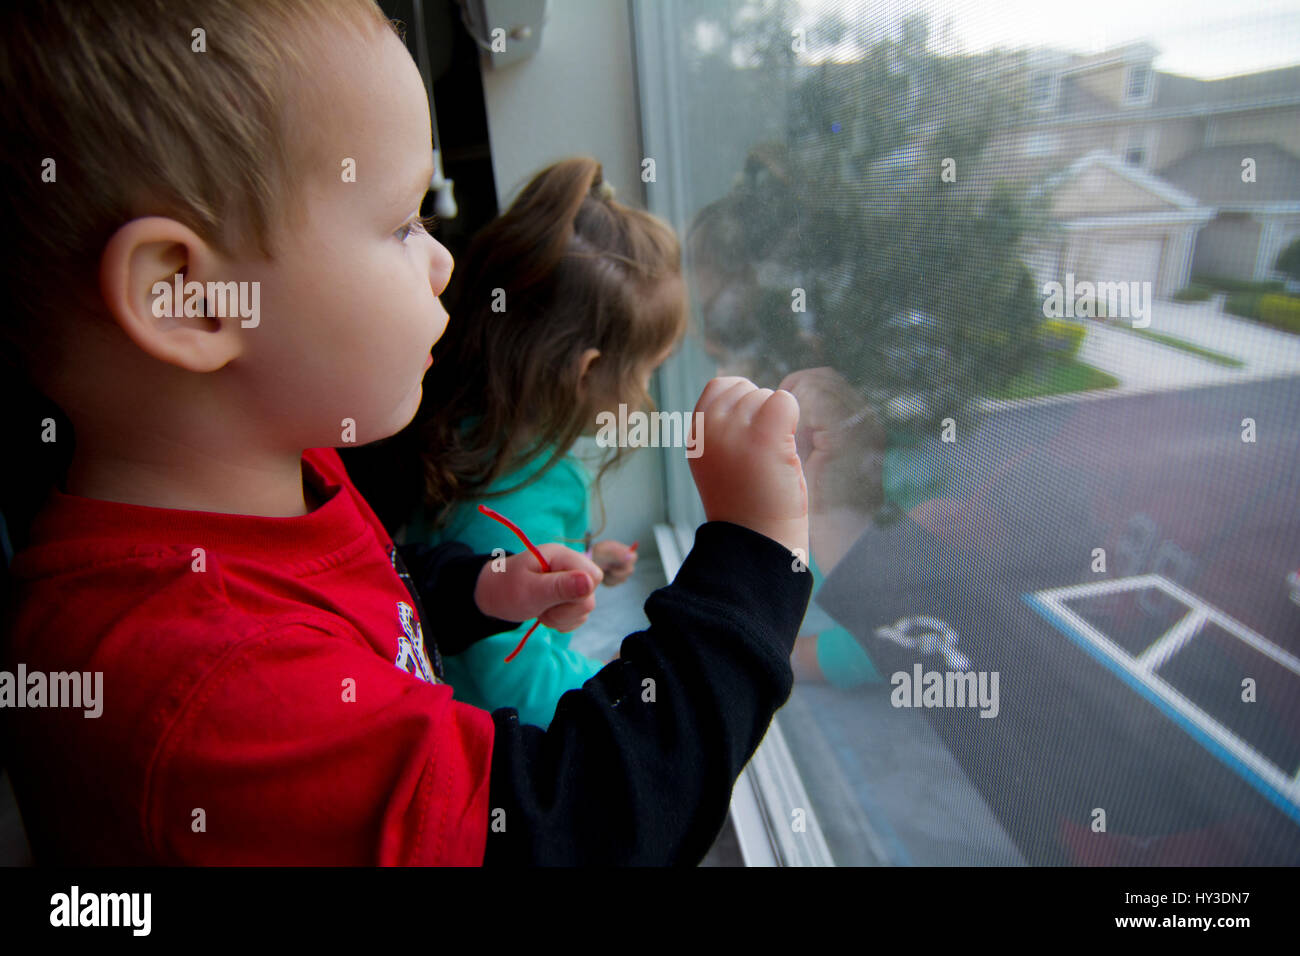 little girl and boy looking out window Stock Photo